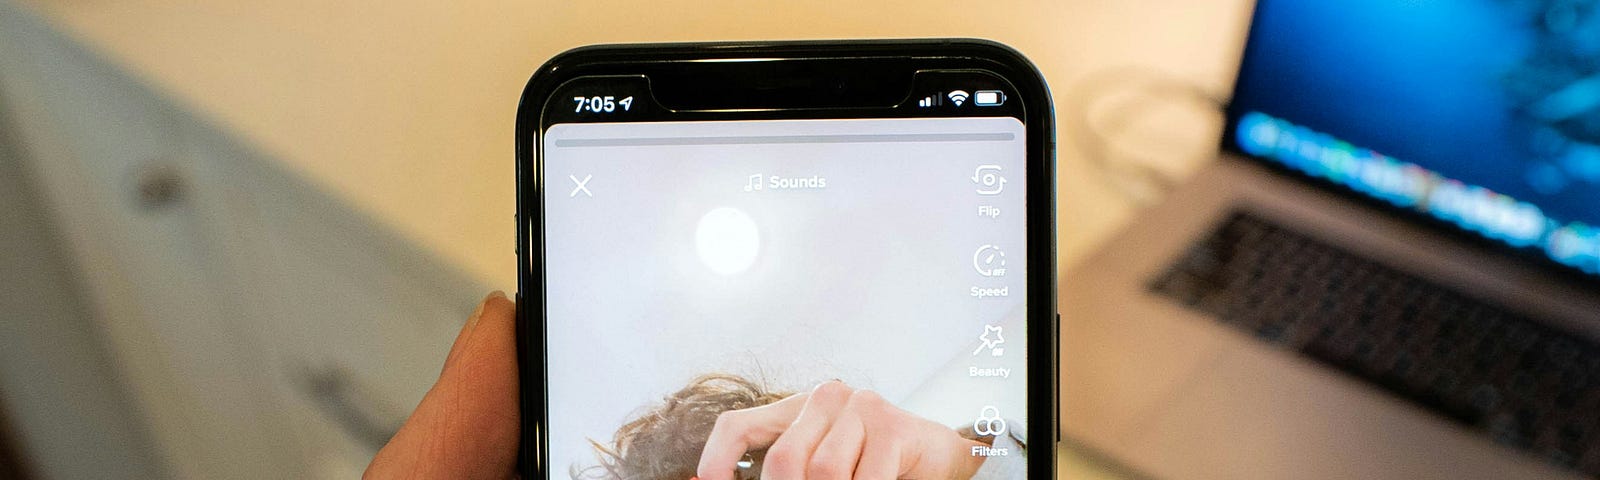 a person holding a phone in their hand- on the display you can see someone else holding a camera and taking a picture- the lense covers the face.